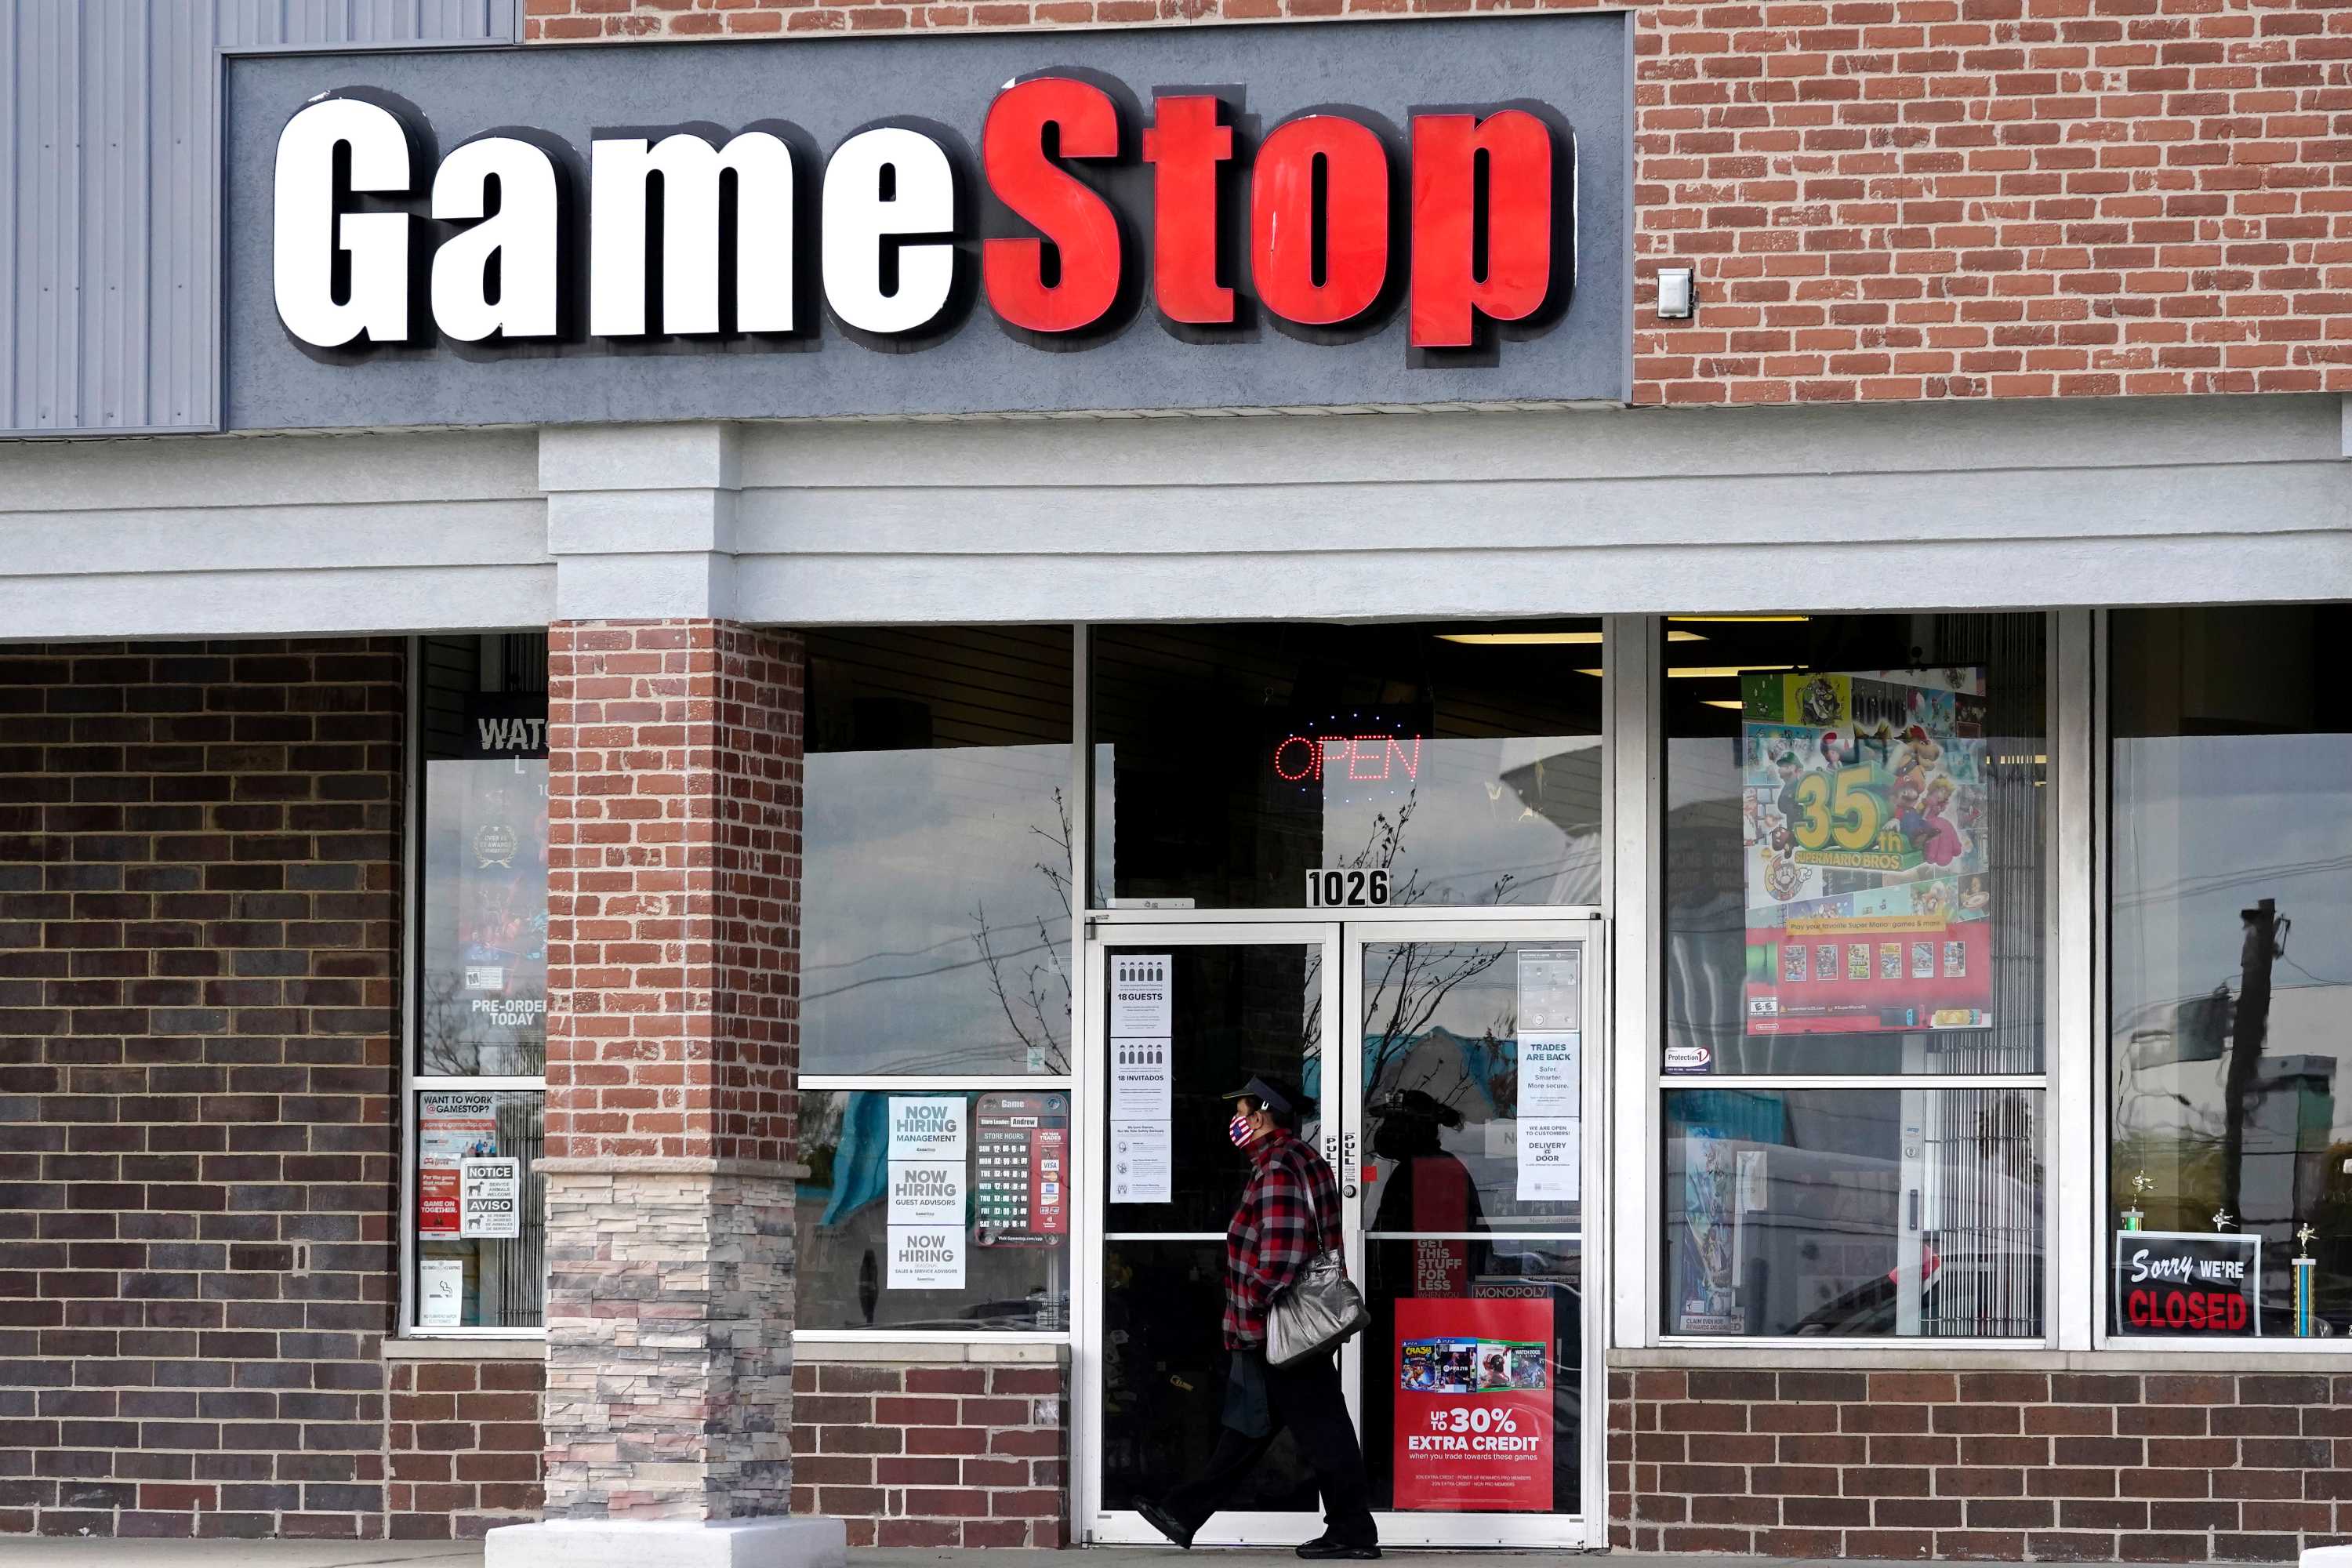 GameStop stock has surged thanks to enthusiastic WallStreetBets Reddit  users. Here's what you need to know - ABC News